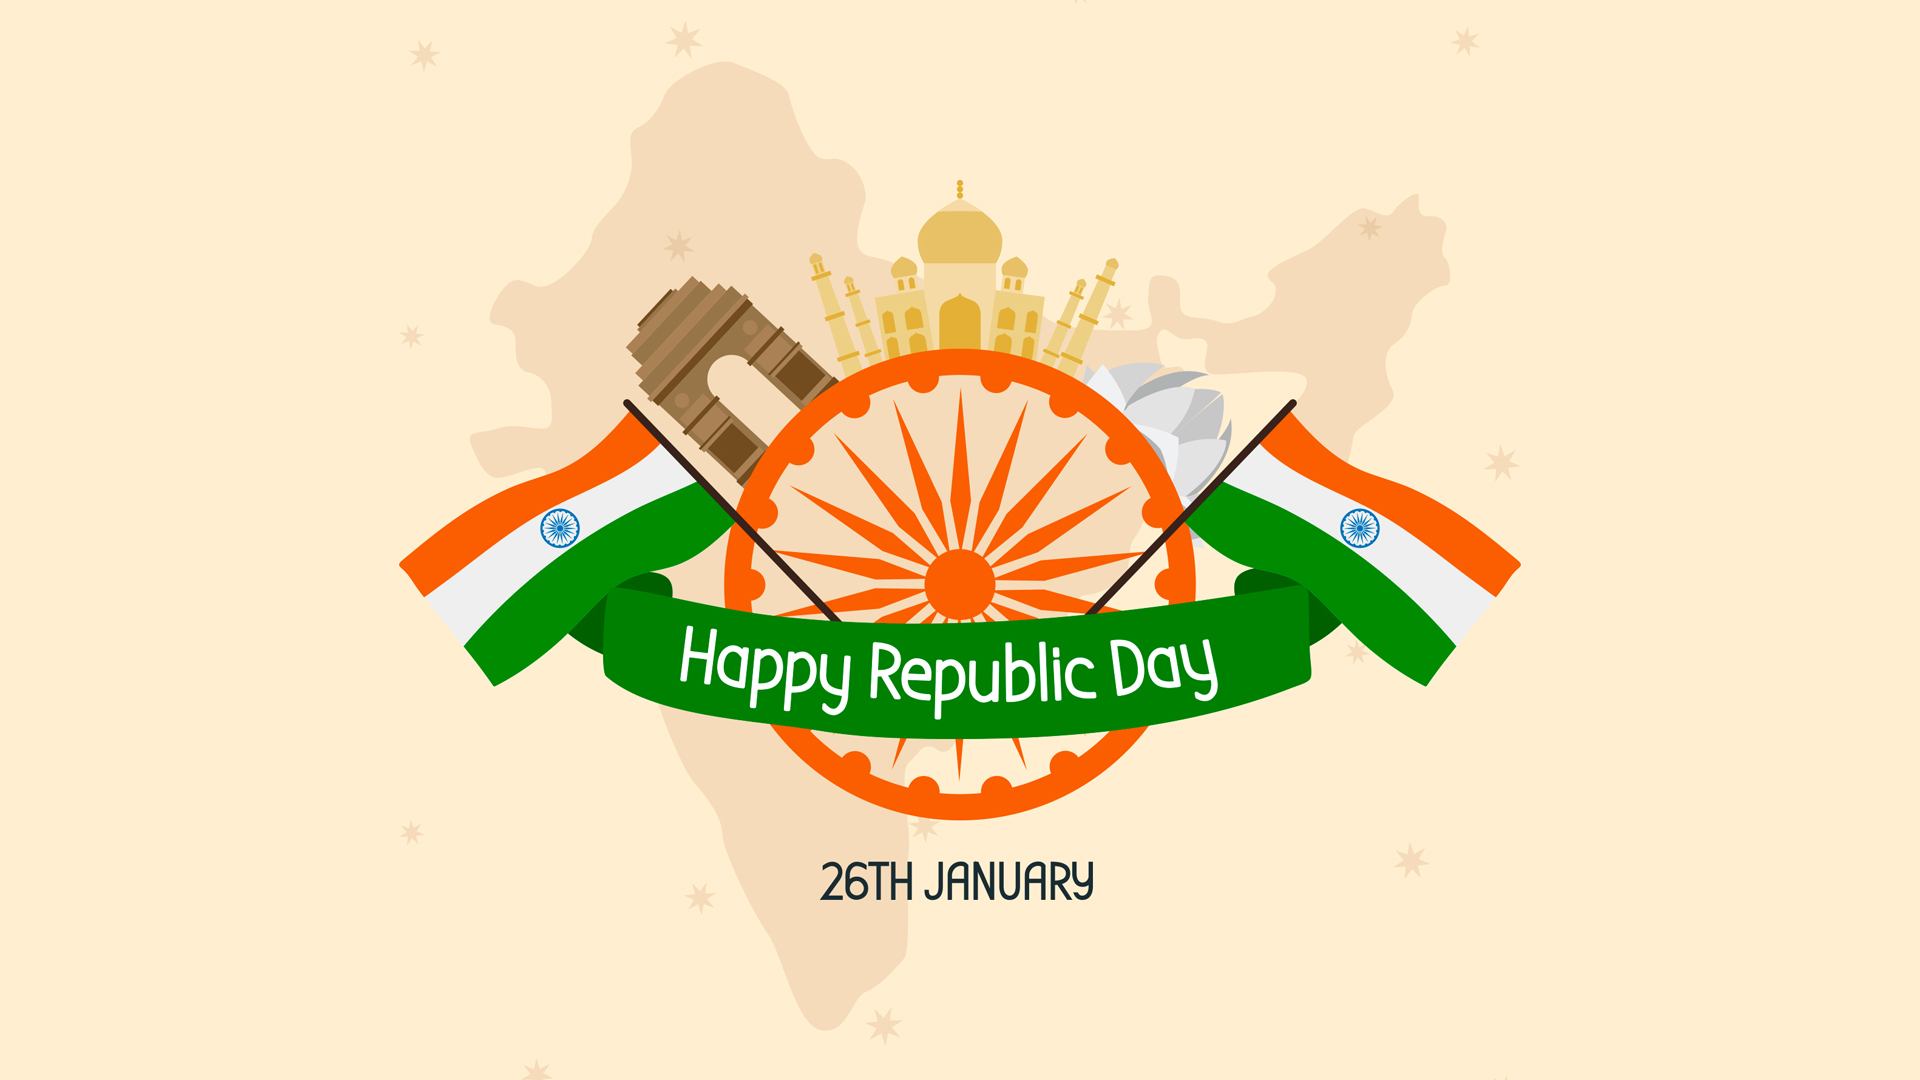 2019 Republic Day Wishes